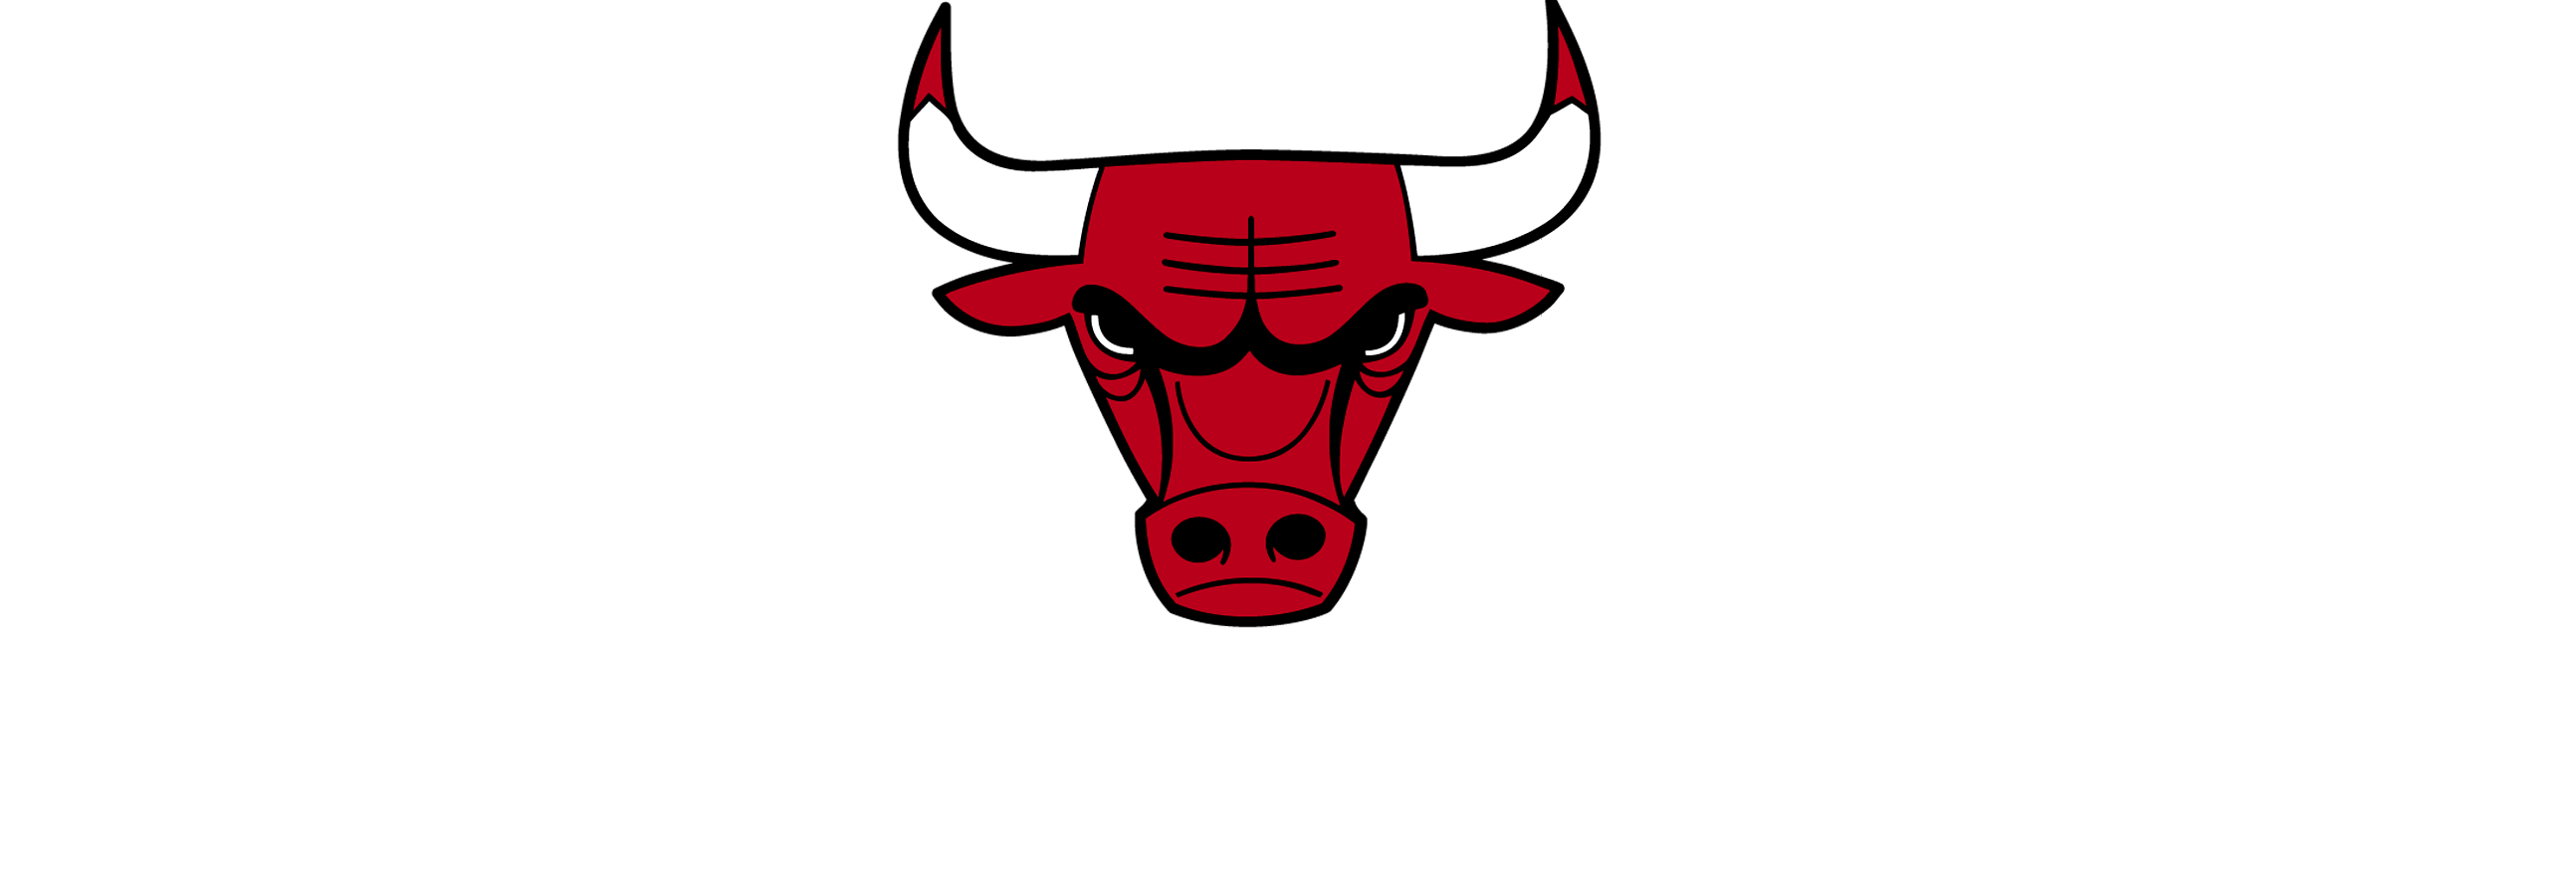 See Red 2015 | Chicago Bulls